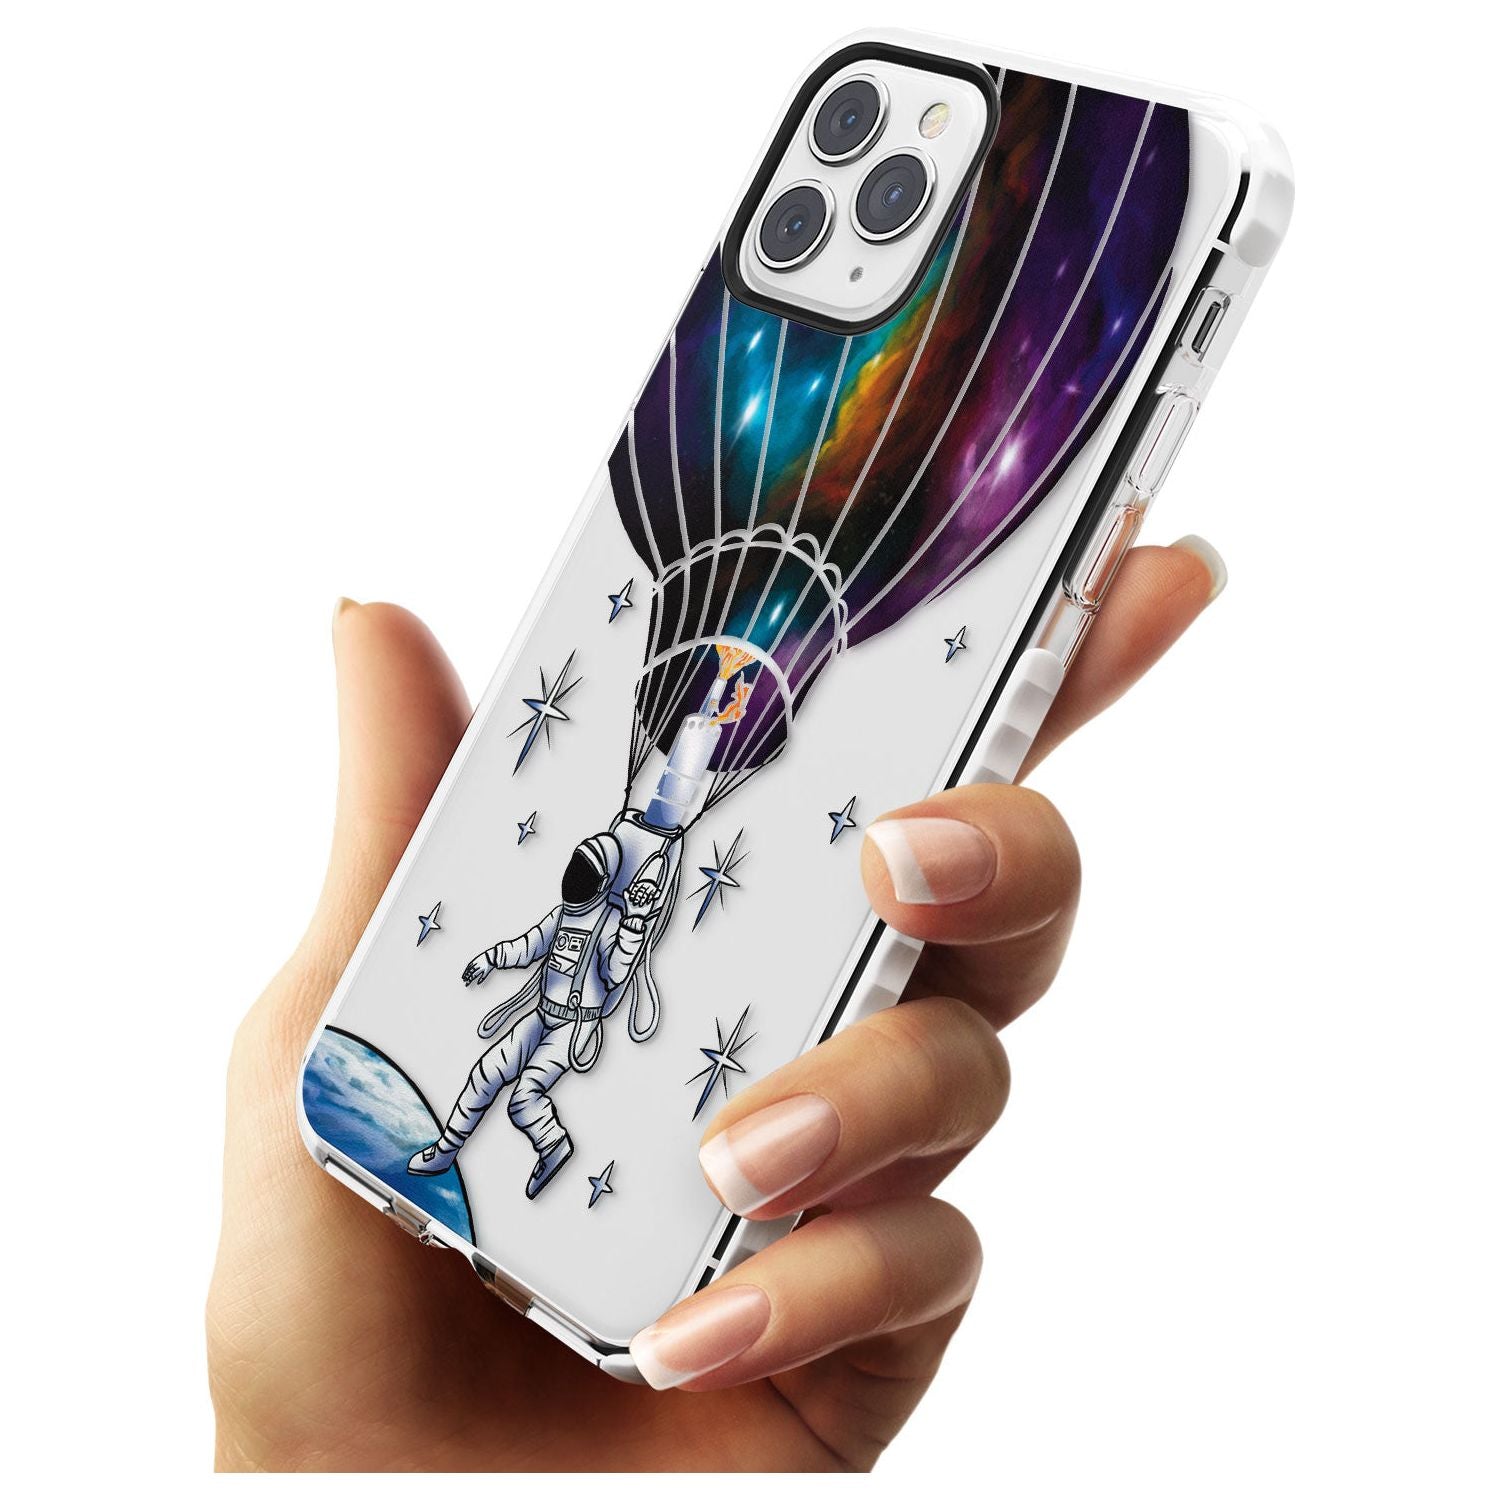 SOLO ODYSSEY Slim TPU Phone Case for iPhone 11 Pro Max